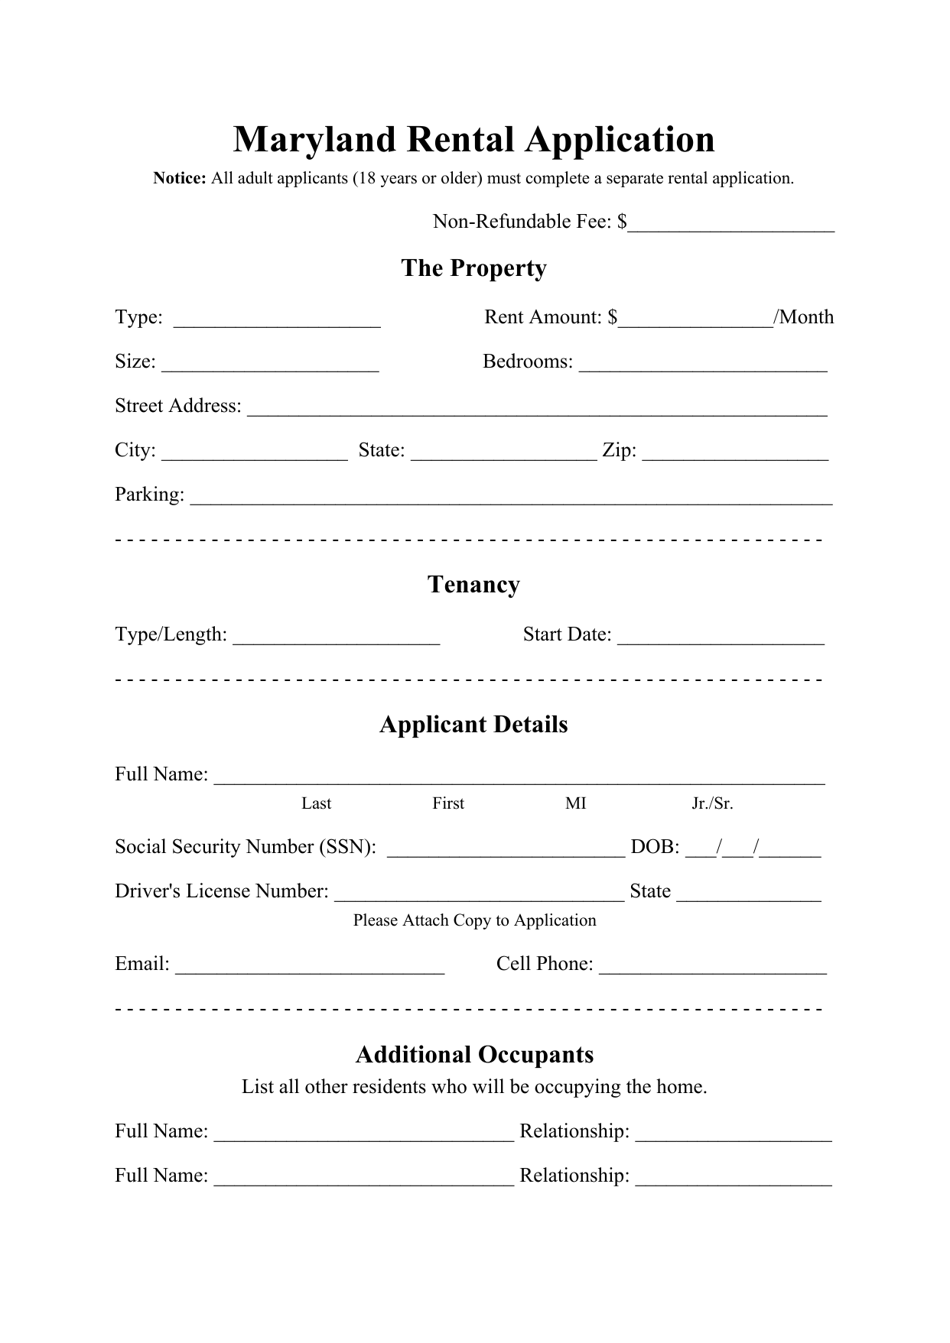 Rental Application Form - Maryland, Page 1